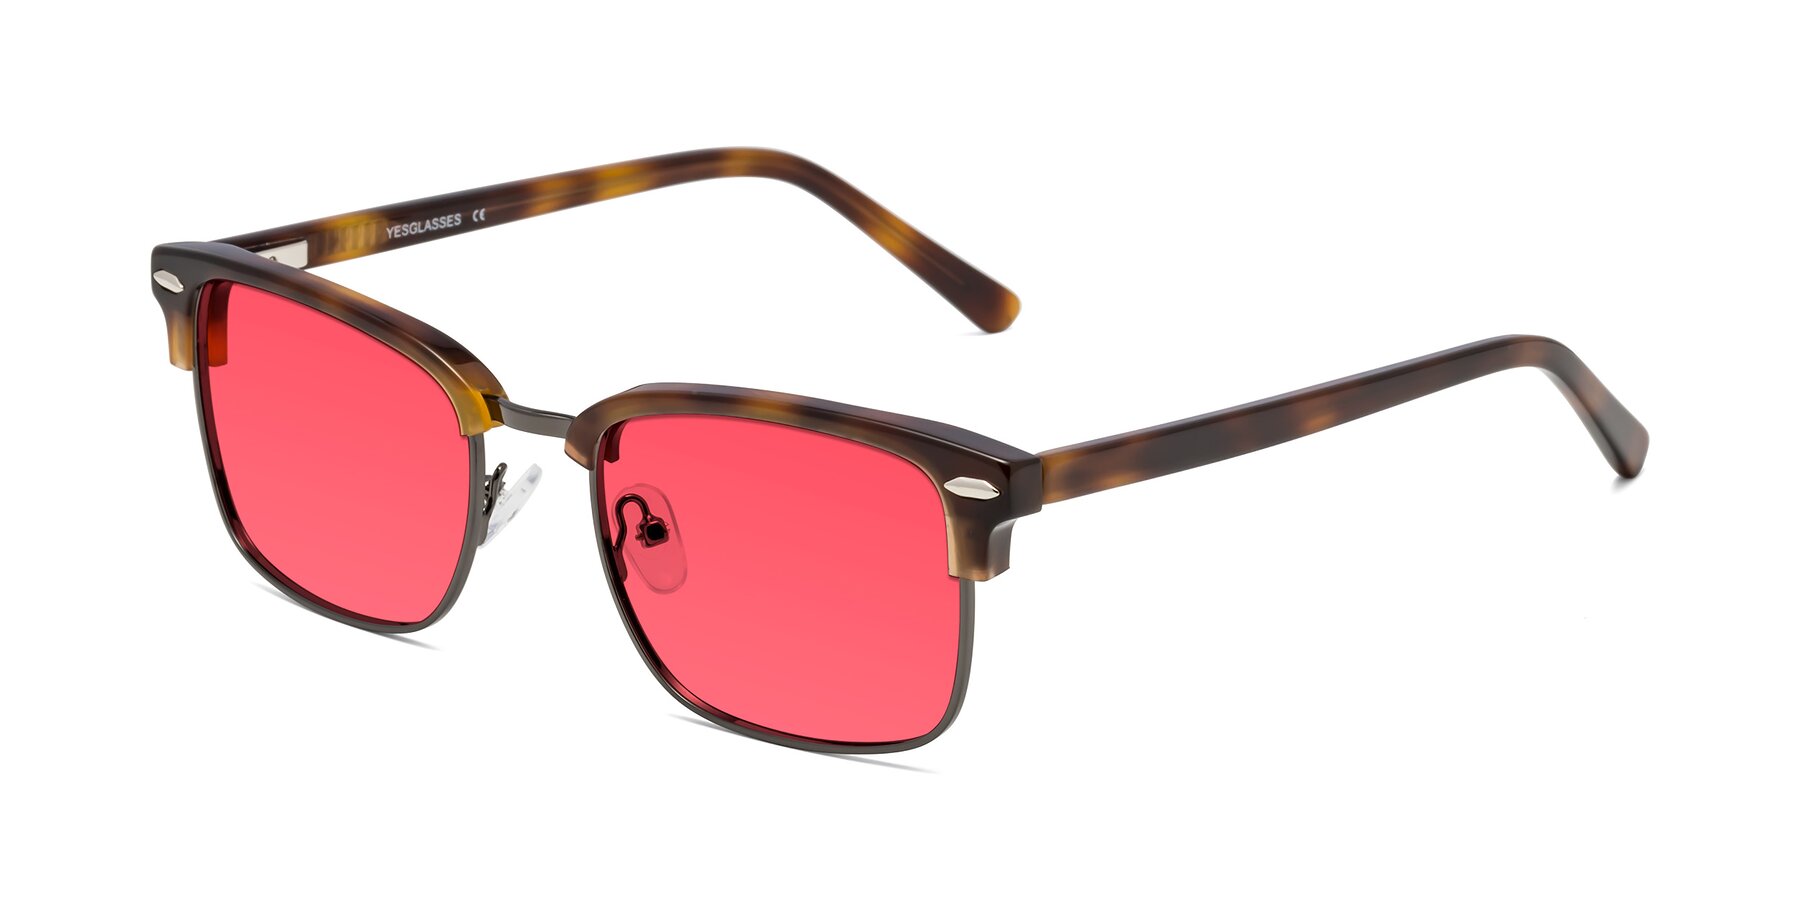 Angle of 17464 in Tortoise/ Gunmetal with Red Tinted Lenses